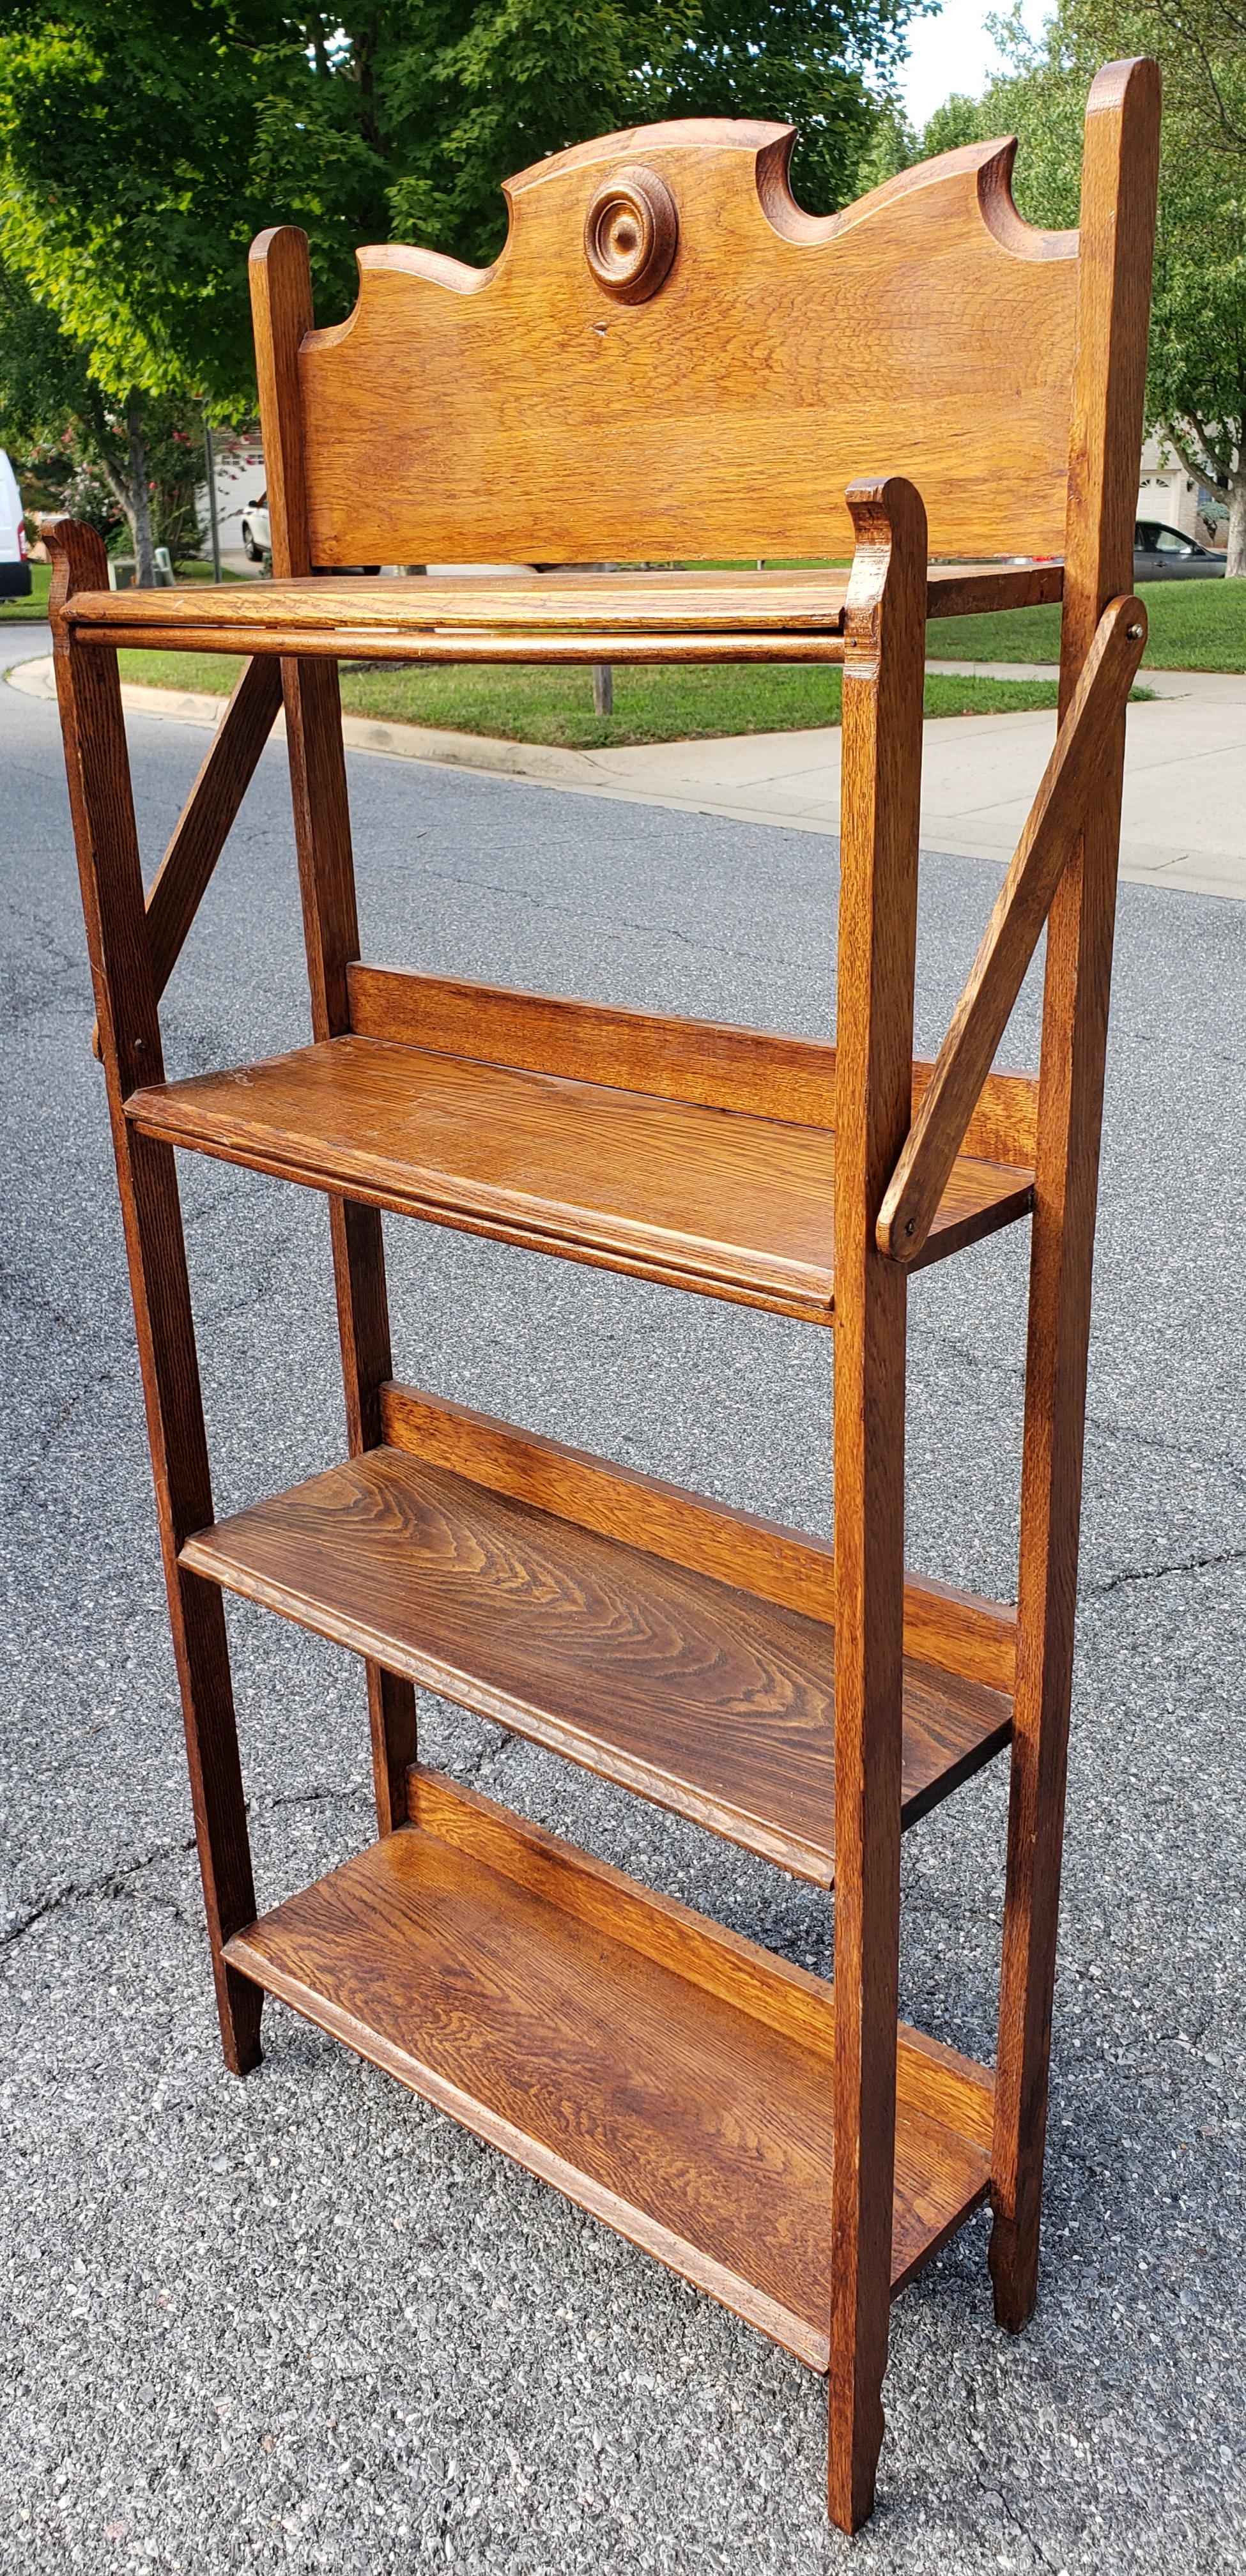 1930s Arts and Craft Oak Folding Etagere or Bookcase measuring 25.5